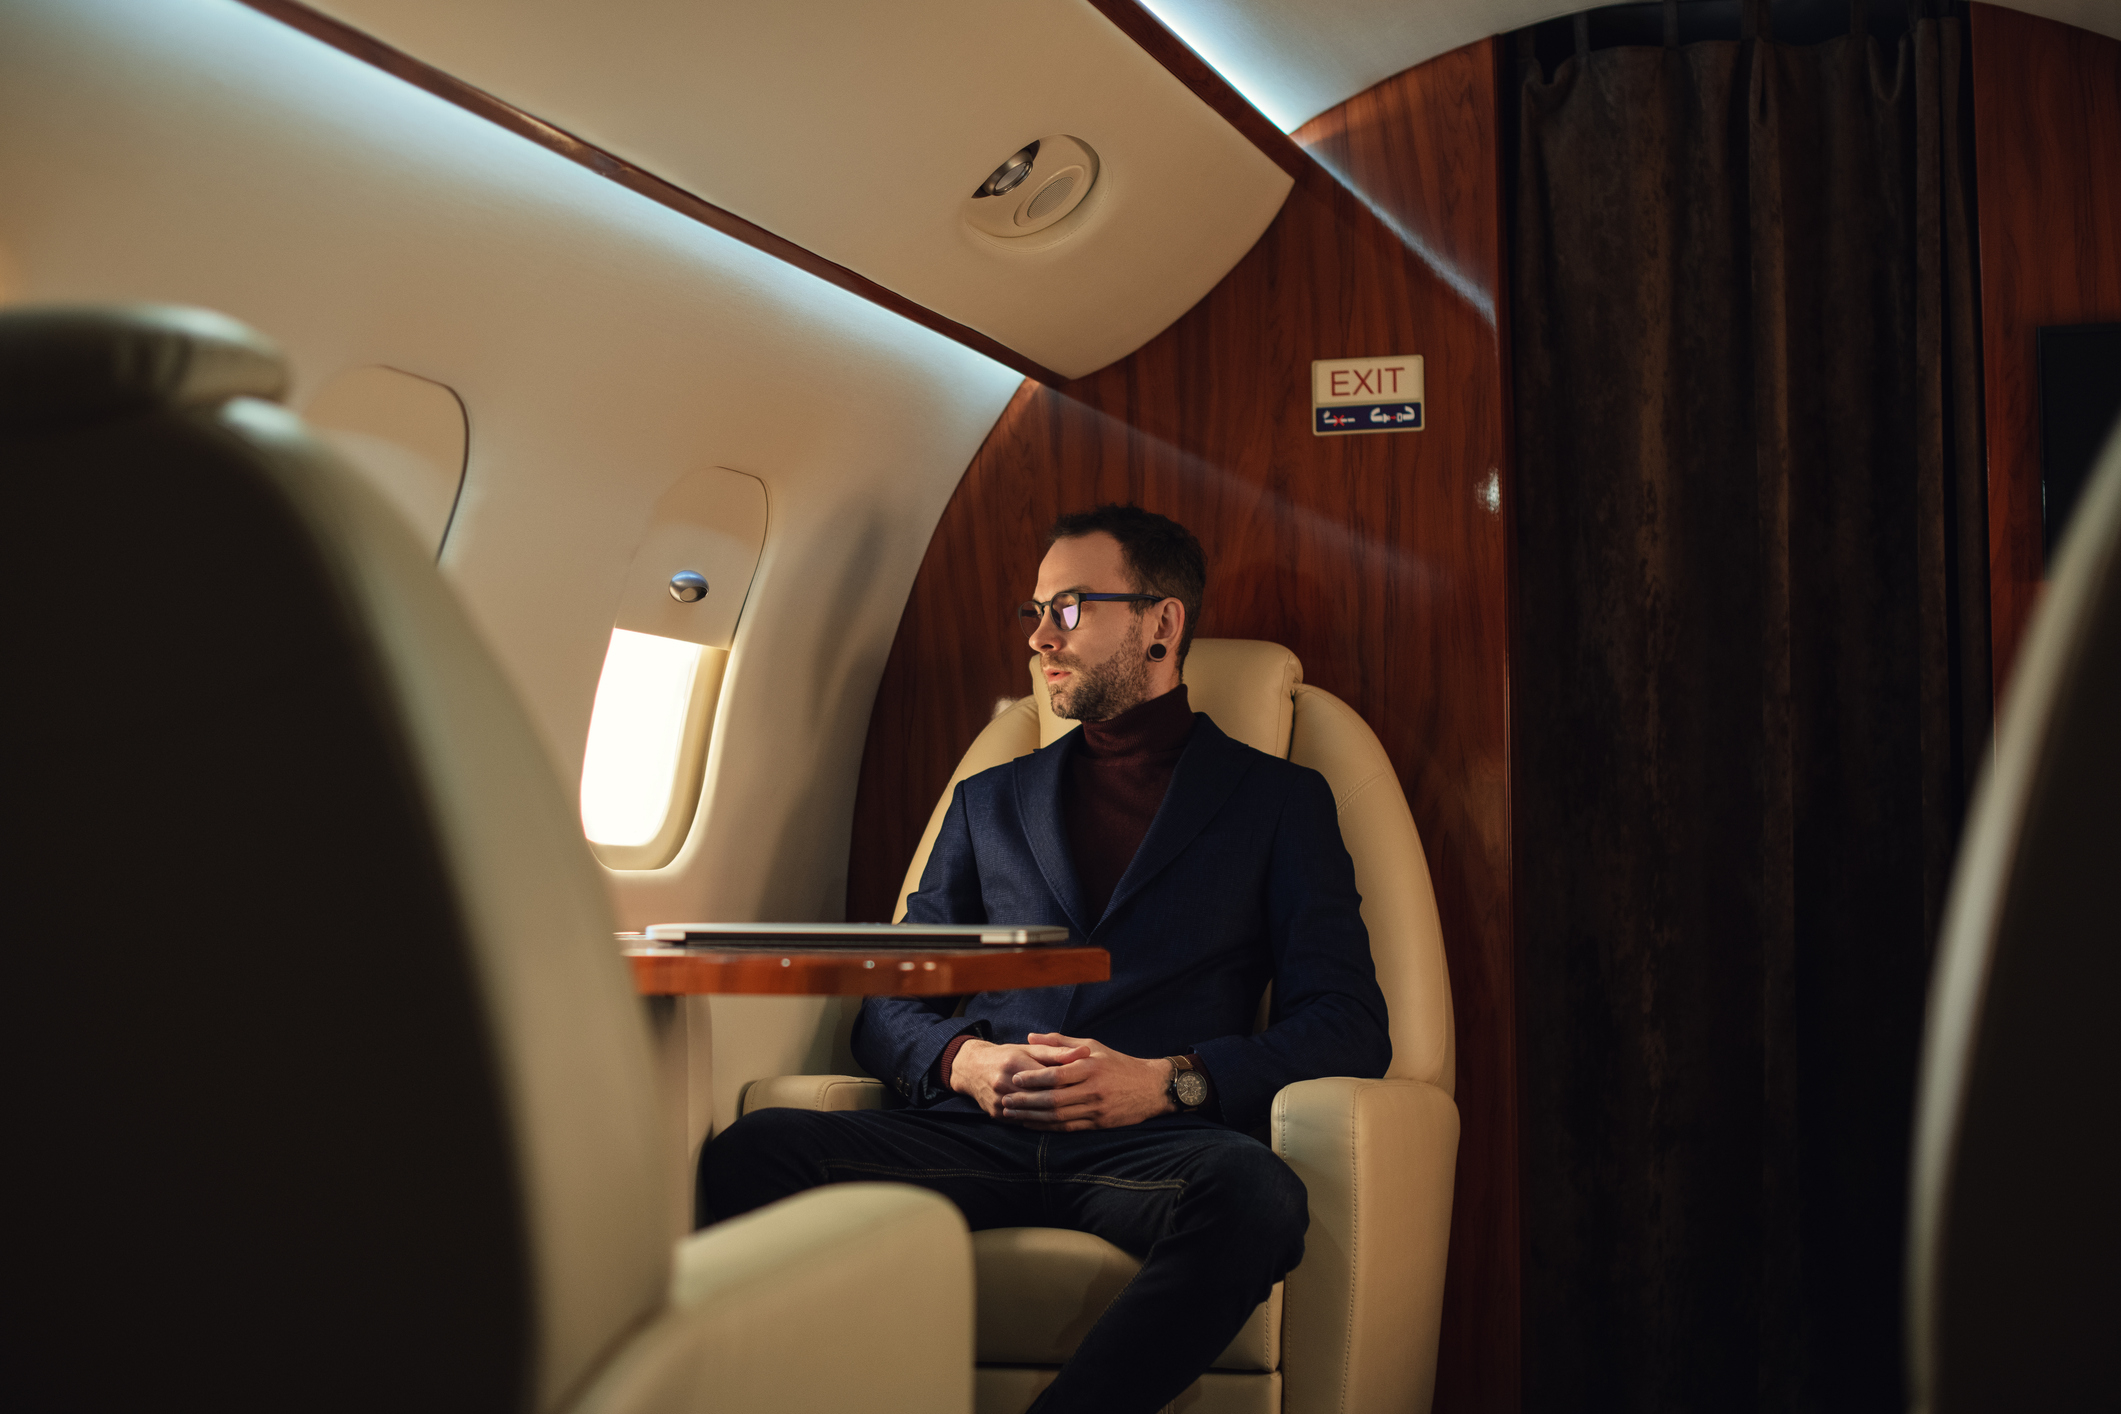 Man in business casual attire sitting in a private jet cabin, contemplating, exemplifying luxurious work travel